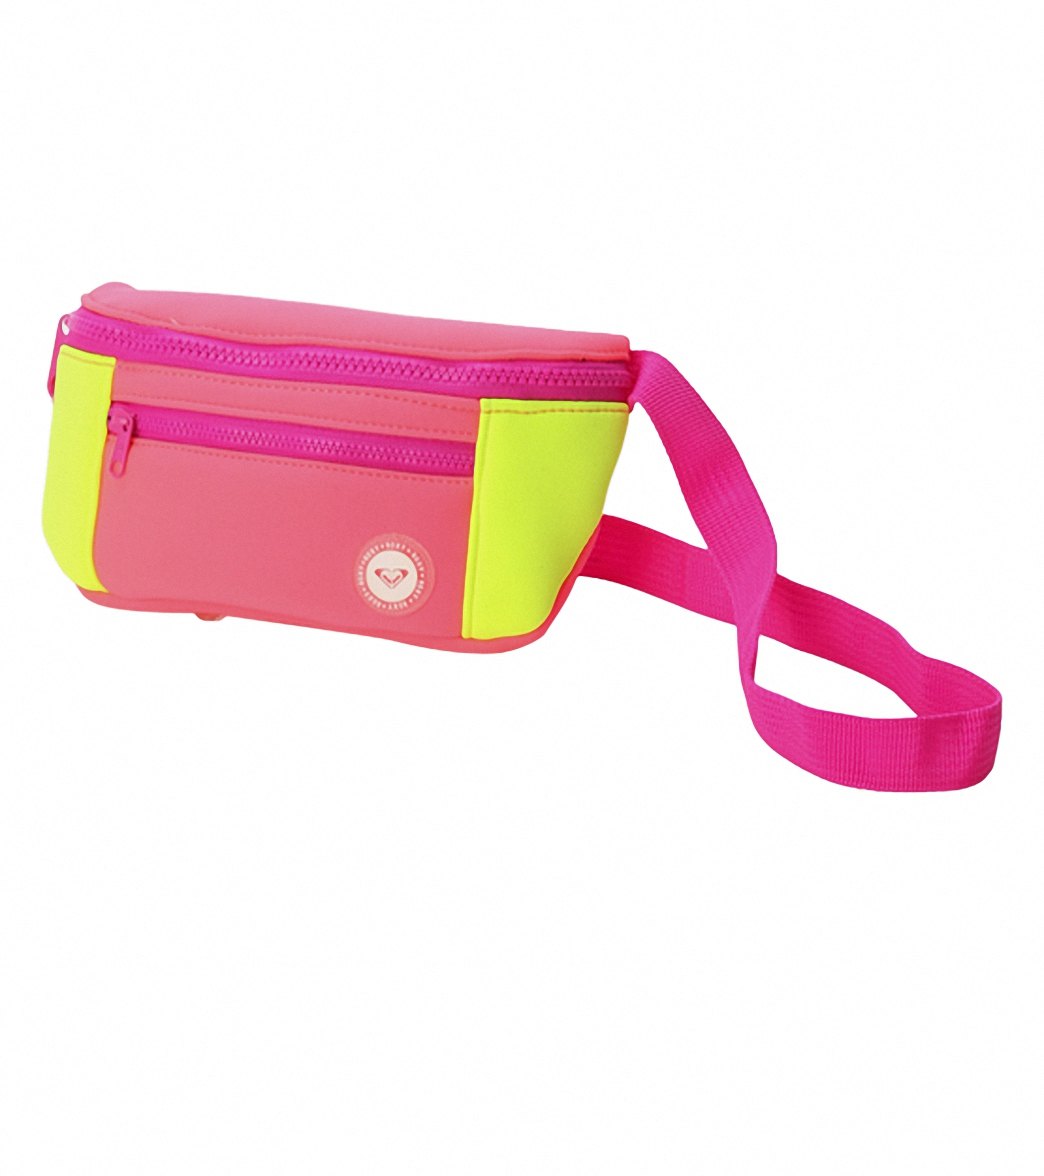 Roxy Paddle Board Neoprene Waist Pack at SwimOutlet.com